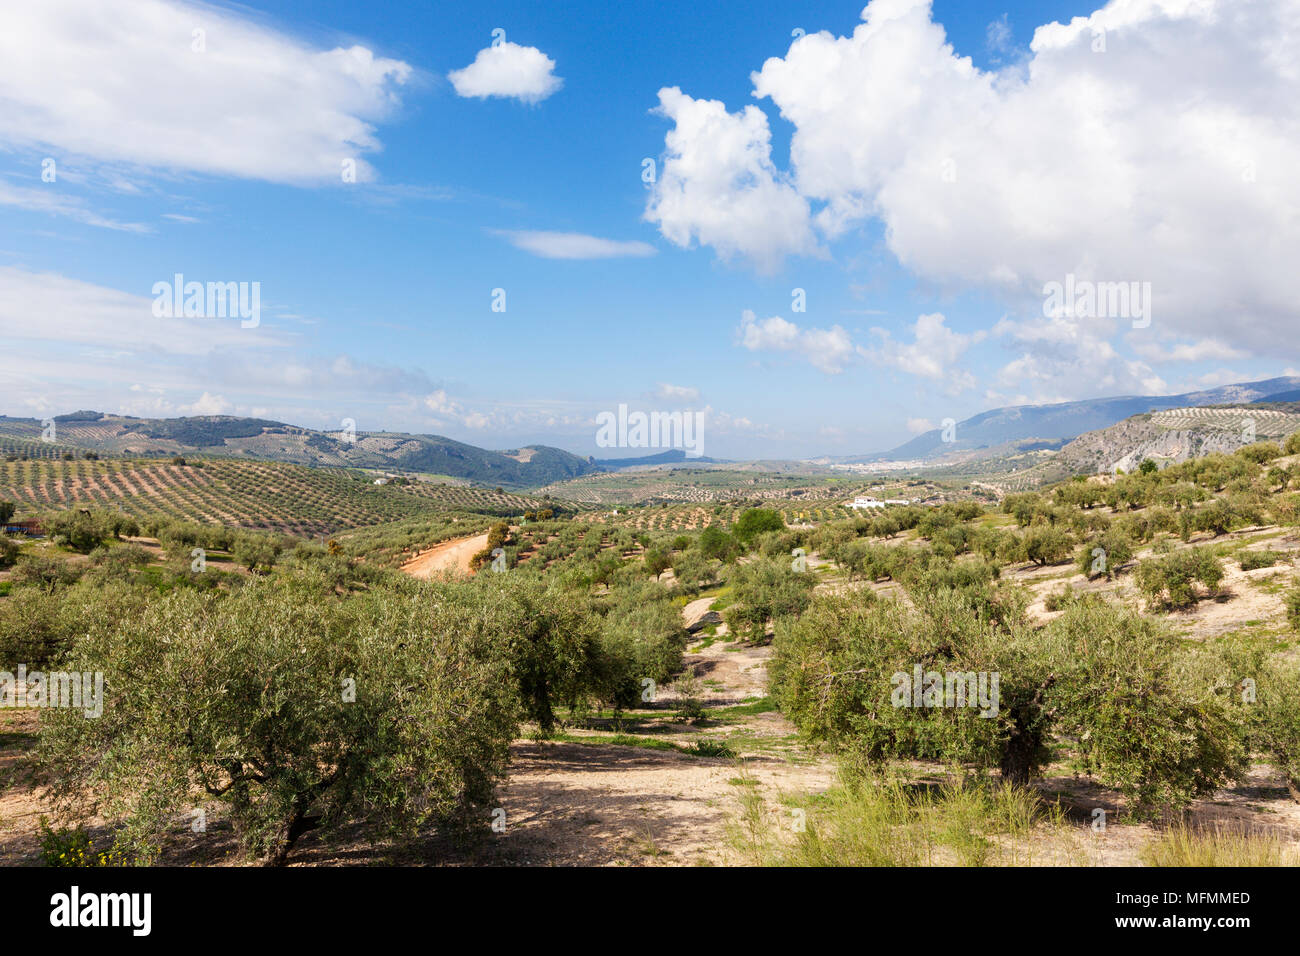 Typical valley with oliv tree plantations in the Granada province, Andalusia, Spain Stock Photo